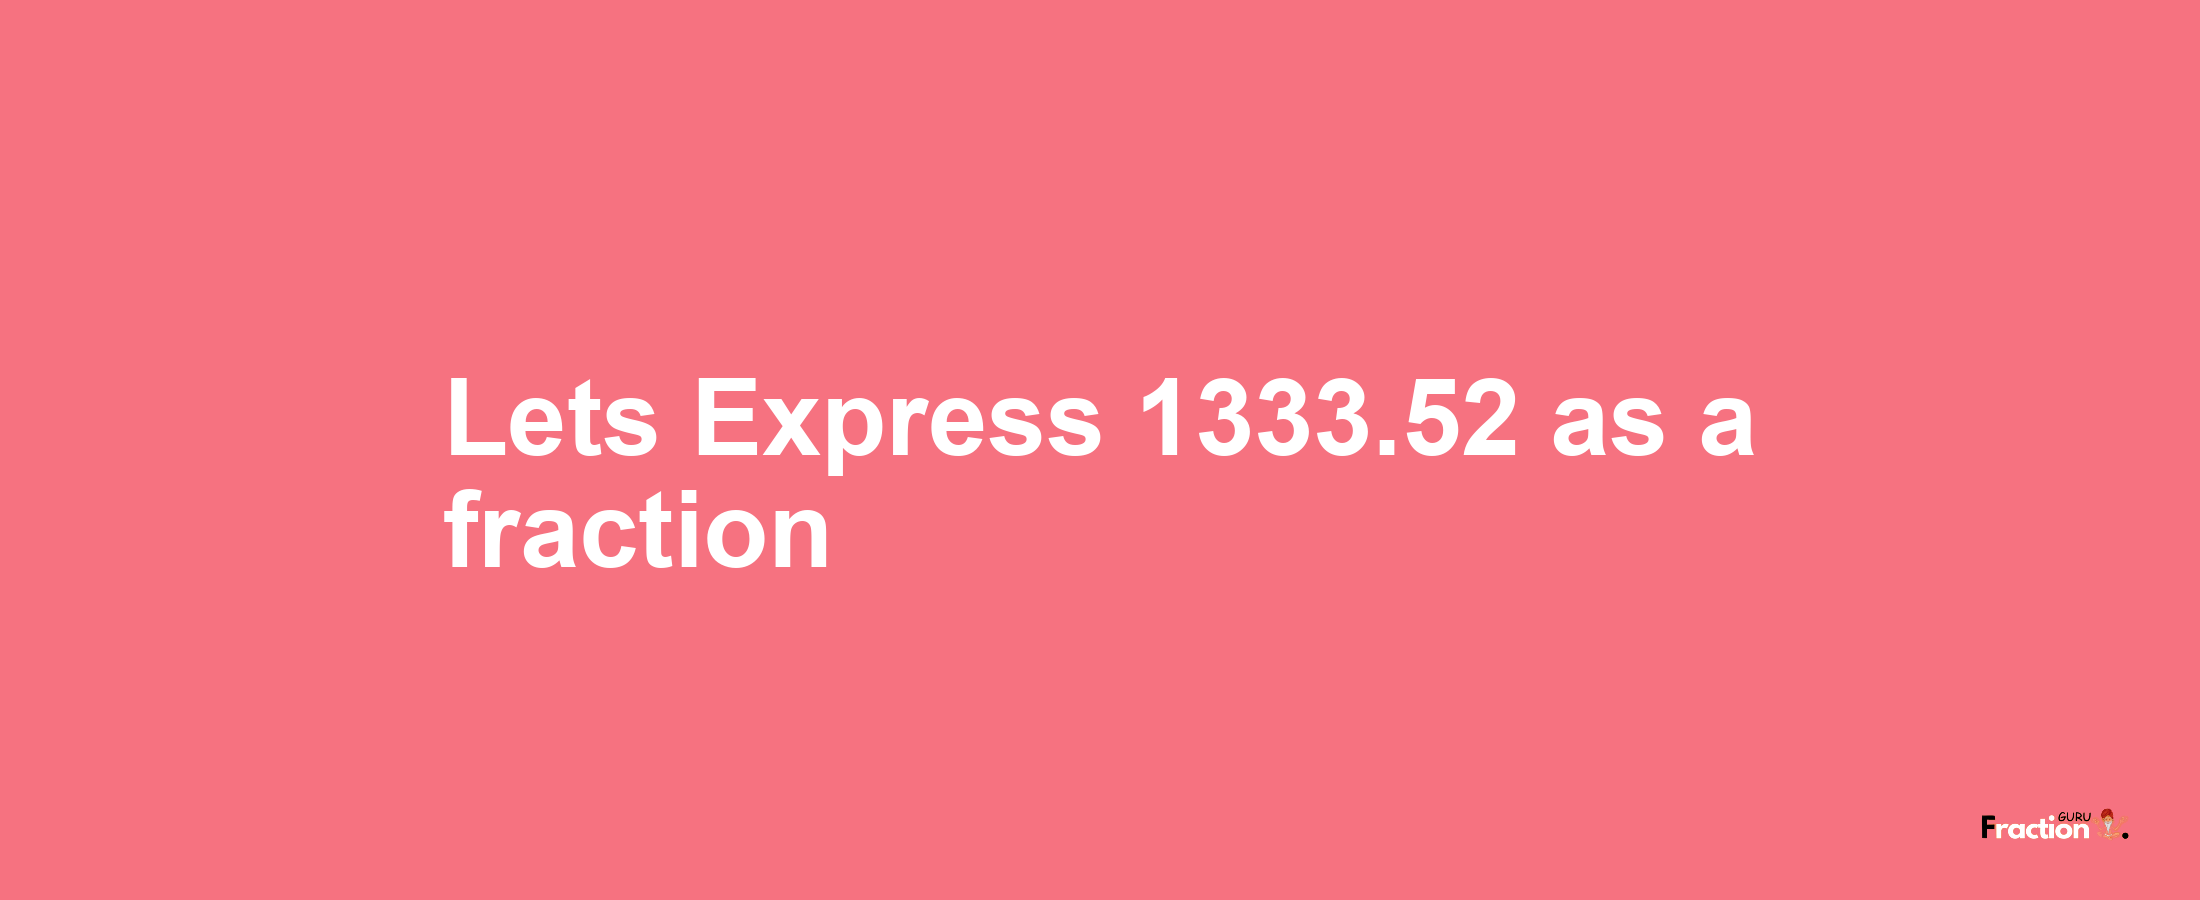 Lets Express 1333.52 as afraction